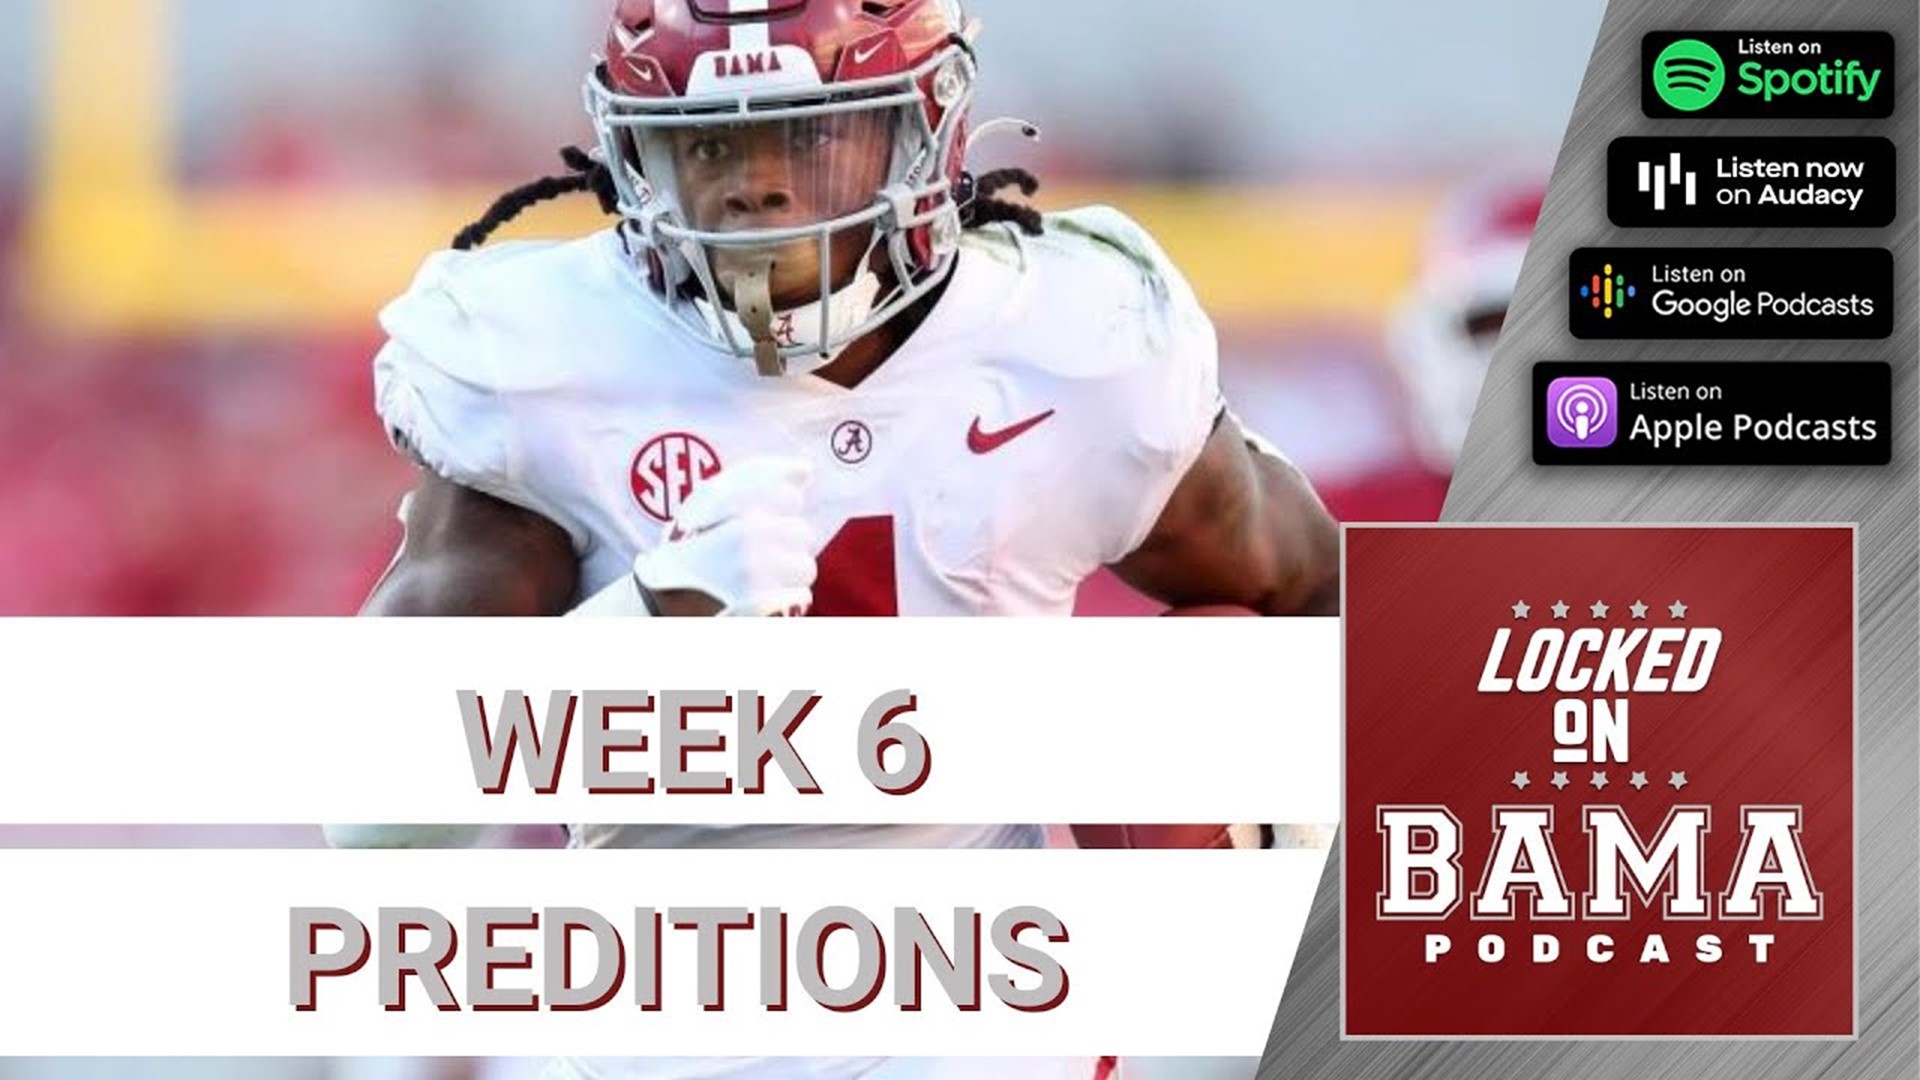 Alabama versus Texas A&M football predictions plus the rest of the SEC games